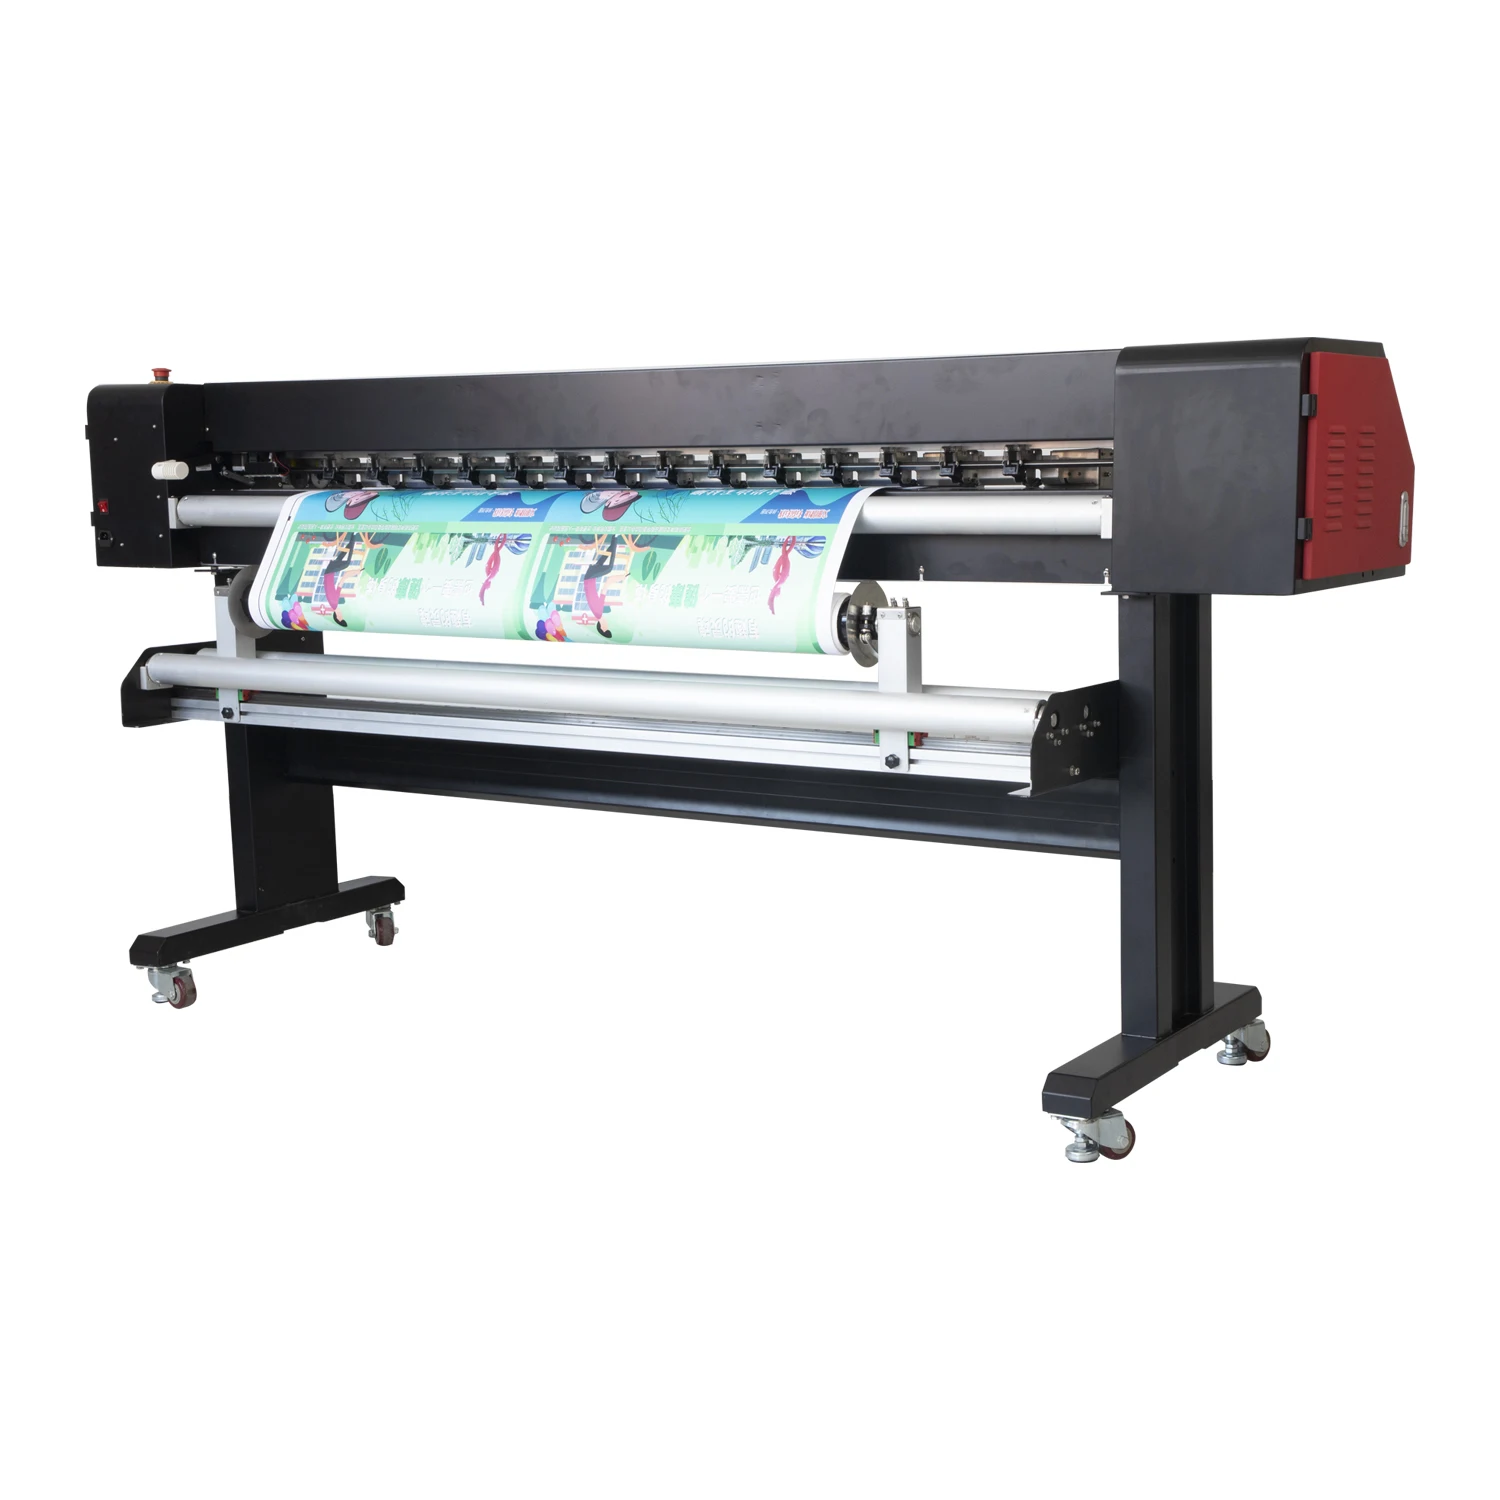 

Automatic Xy Axis Plastic Film Paper Roll to Sheet Slitting Cutting Trimmer Machine for Sale TM160